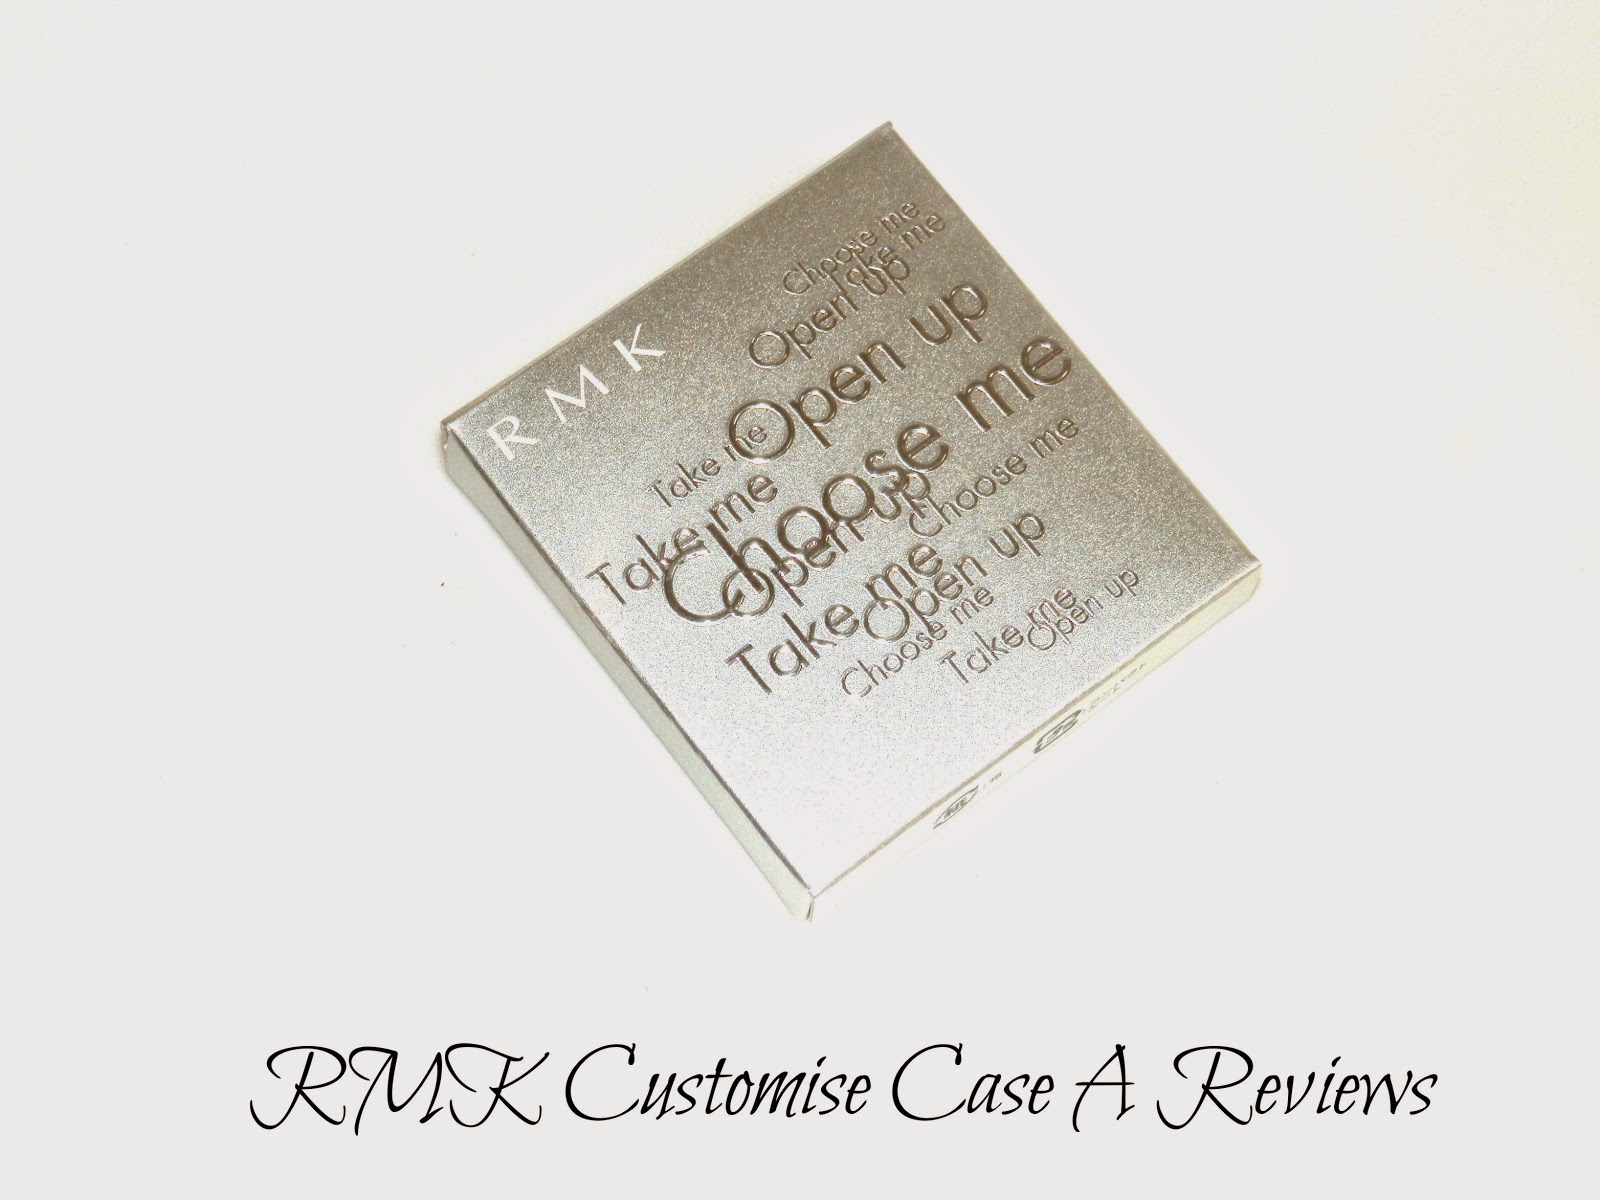 RMK Customise Case A Reviews